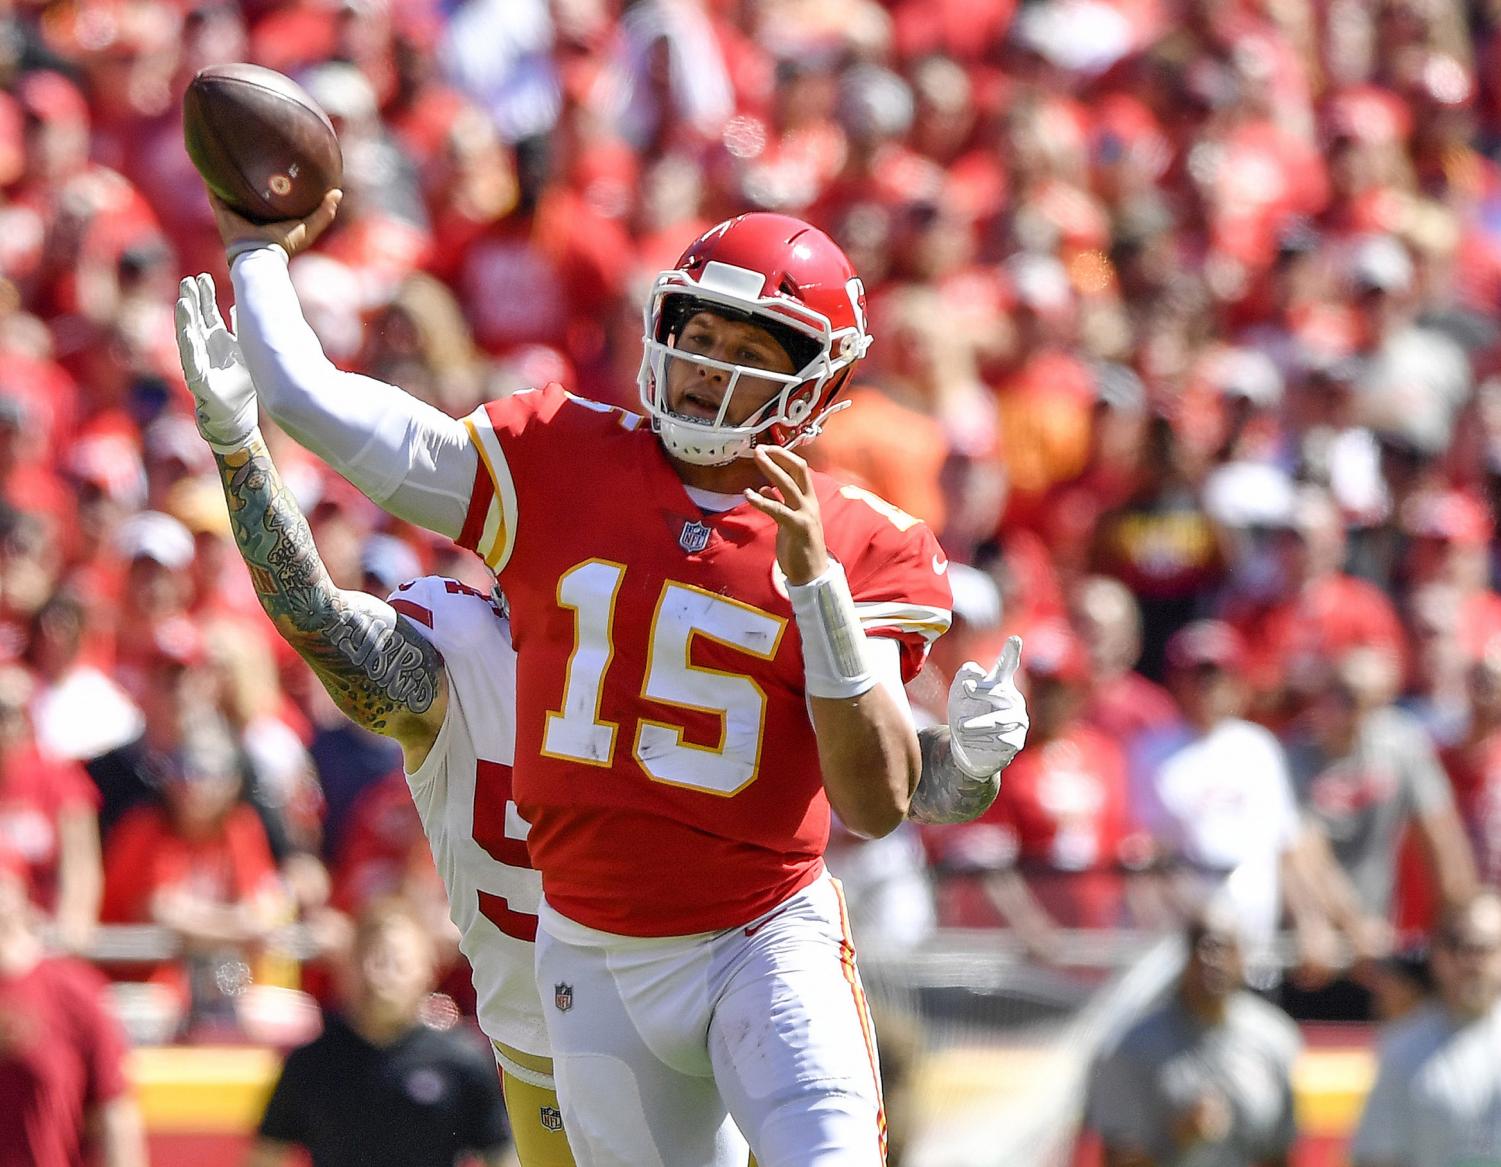 Mahomes+and+Fitzpatrick%3A+The+hot+hands+in+the+NFL